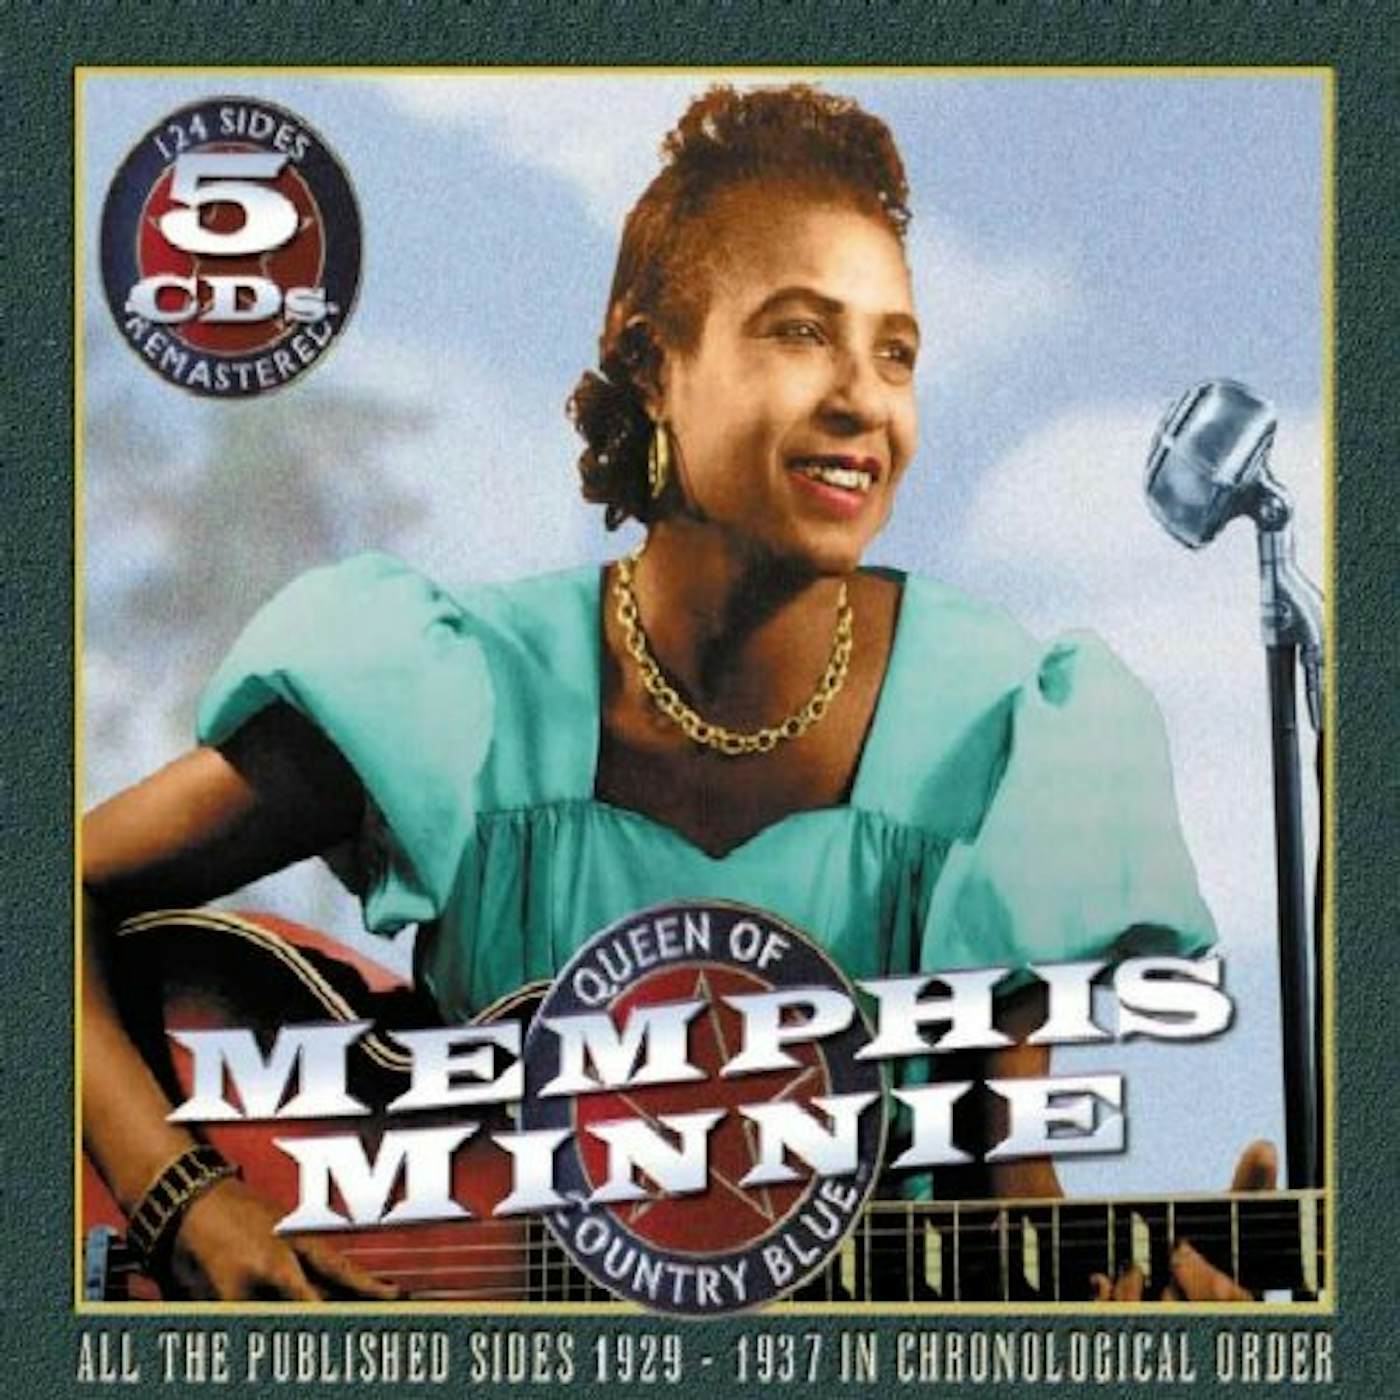 Memphis Minnie QUEEN OF COUNTRY BLUES 1929-1937 CD